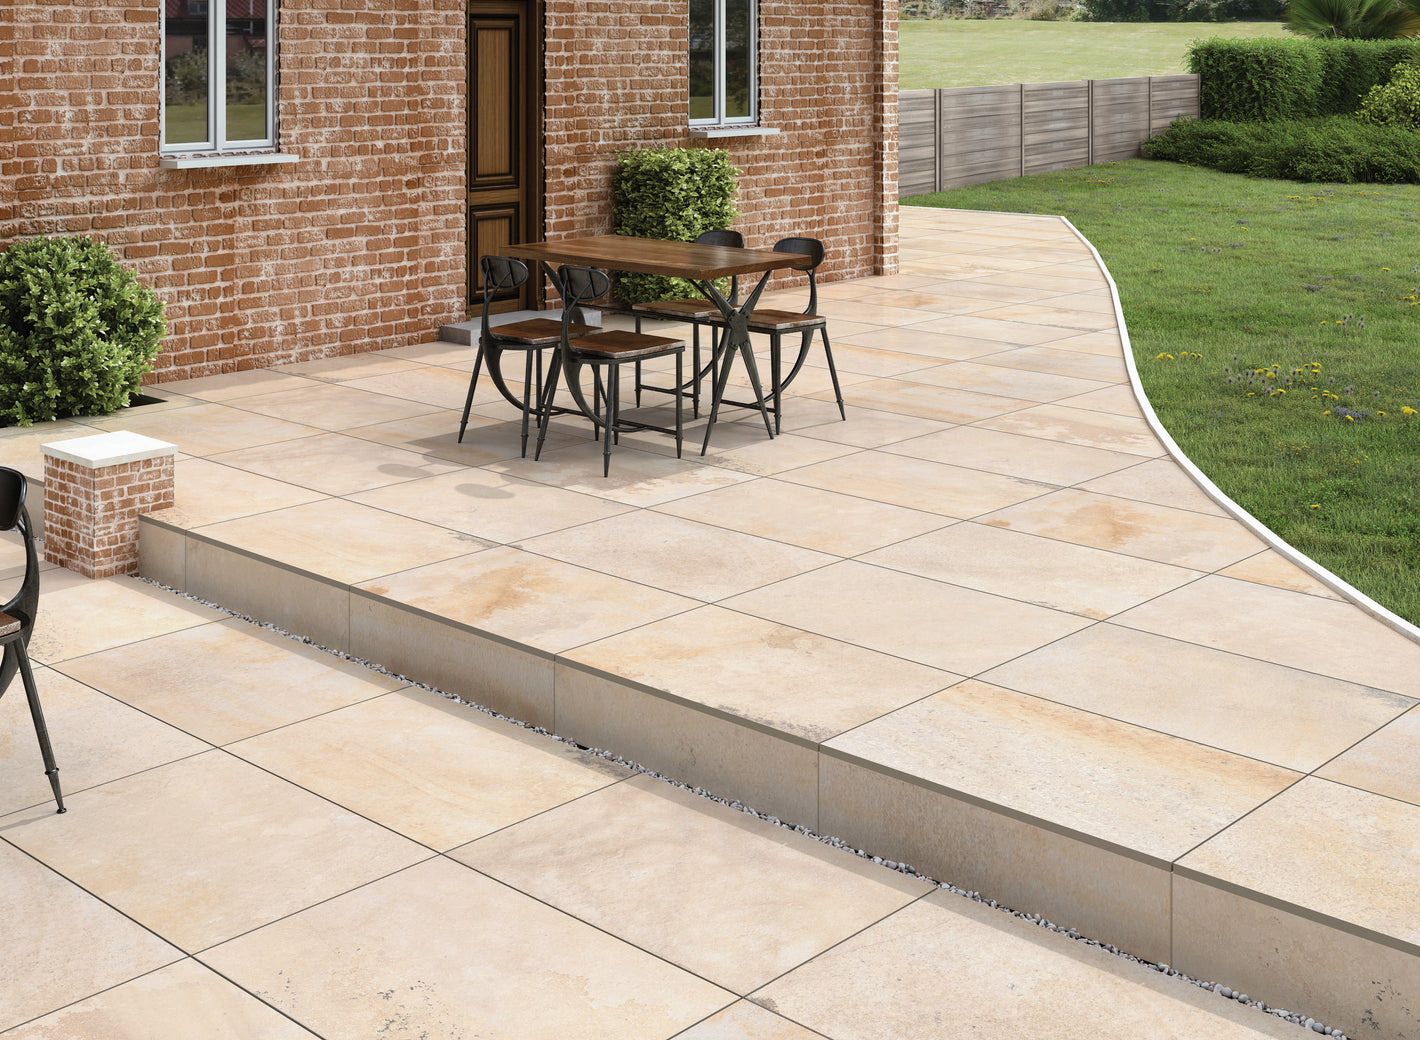 Picture of Mint Fossil porcelain paving tiles - a chic and stylish option for outdoor spaces. These rectified porcelain tiles have a natural appearance and texture, come in one size option, and are frost-resistant and slip-resistant, making them perfect for outdoor use. They are also hard-wearing and virtually maintenance-free.